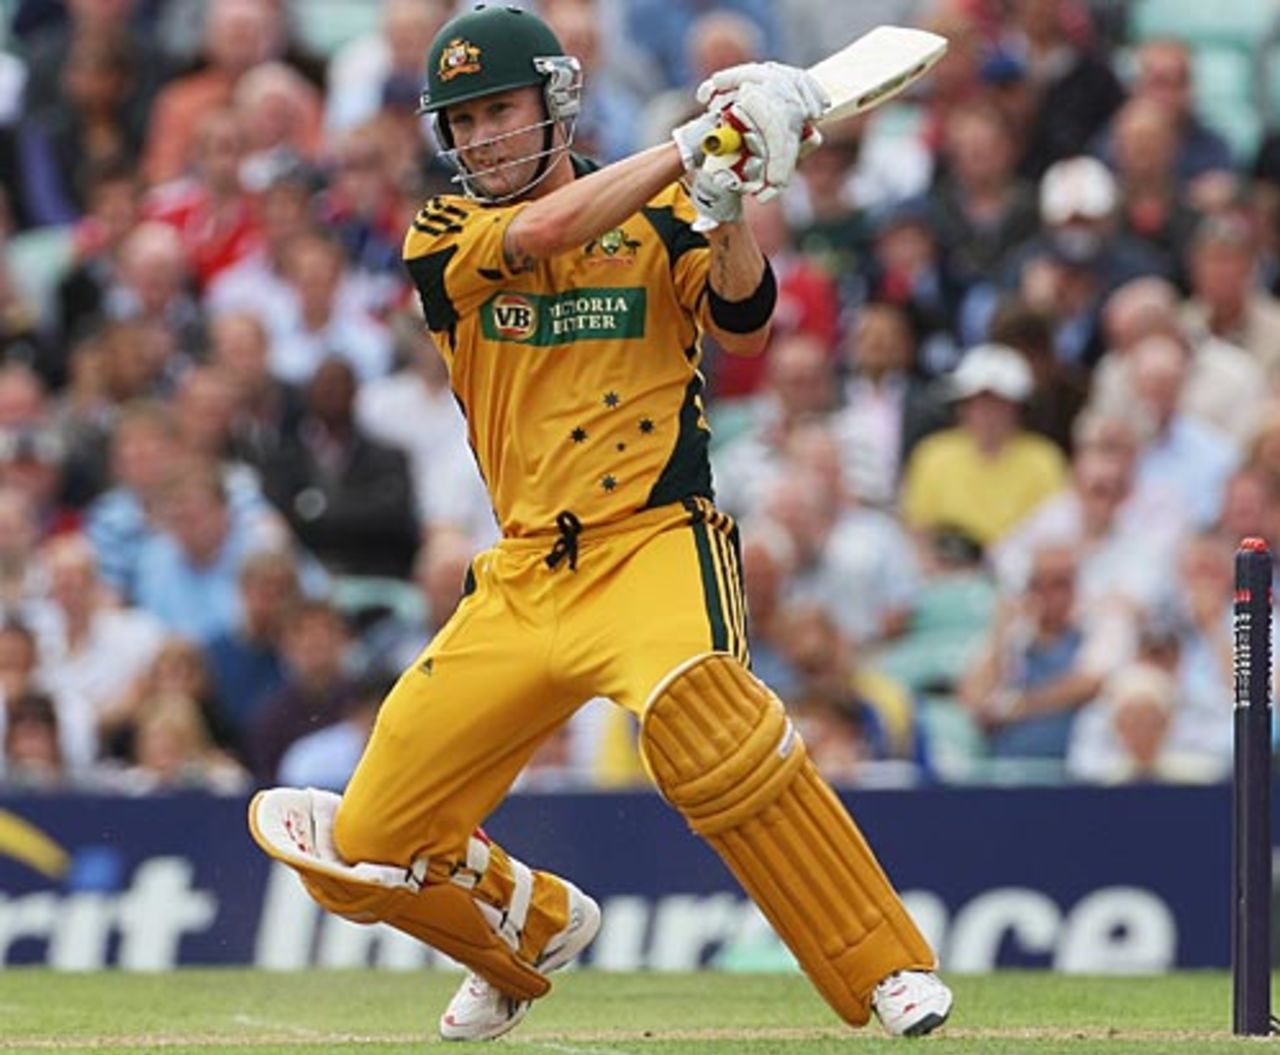 Michael Clarke pulls from deep in his crease, England v Australia, 1st ODI, The Oval, September 4, 2009